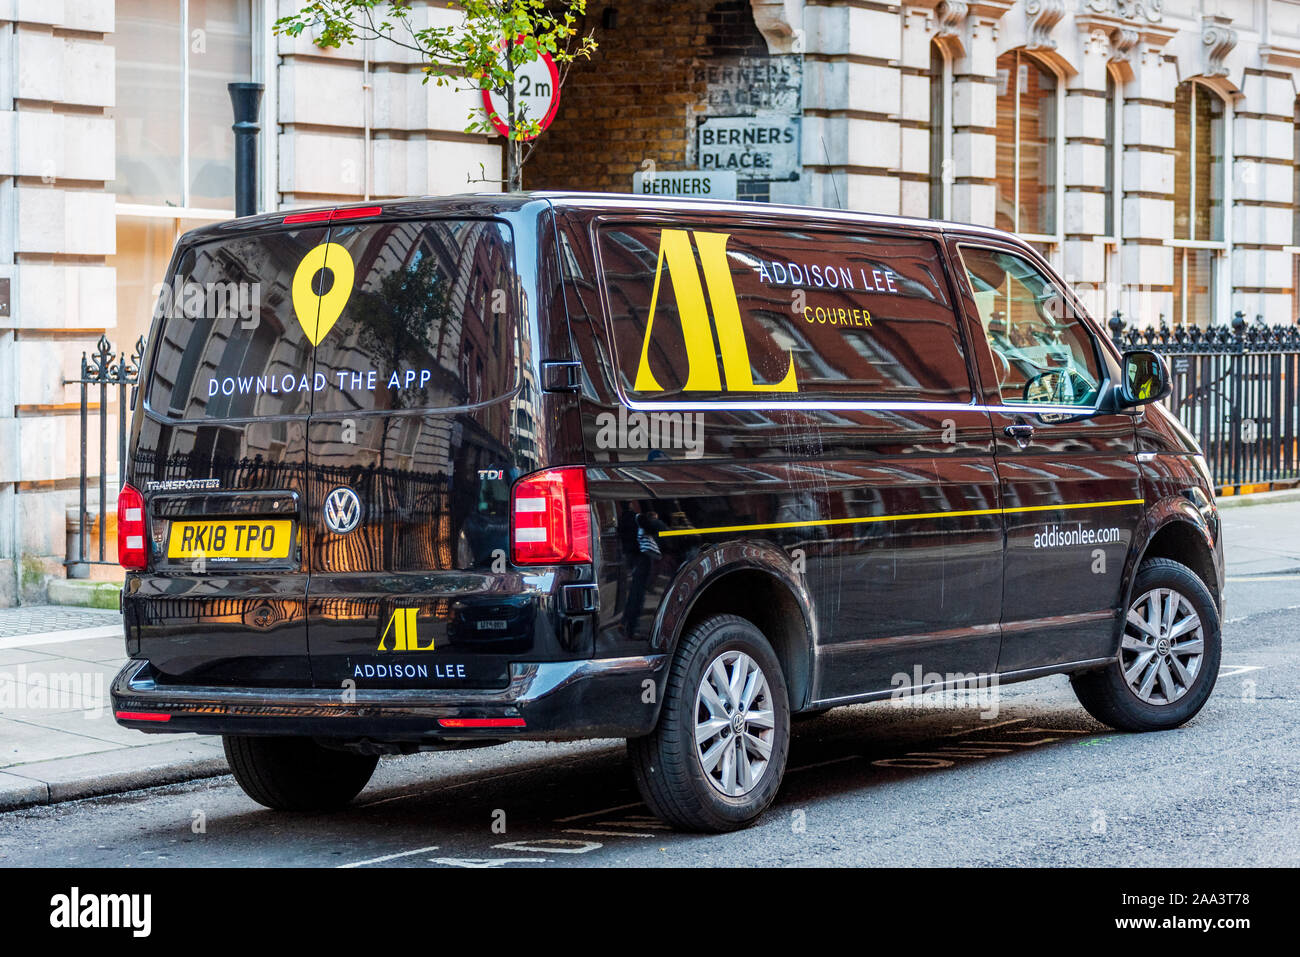 Addison Lee Courier Van in Central London Stock Photo